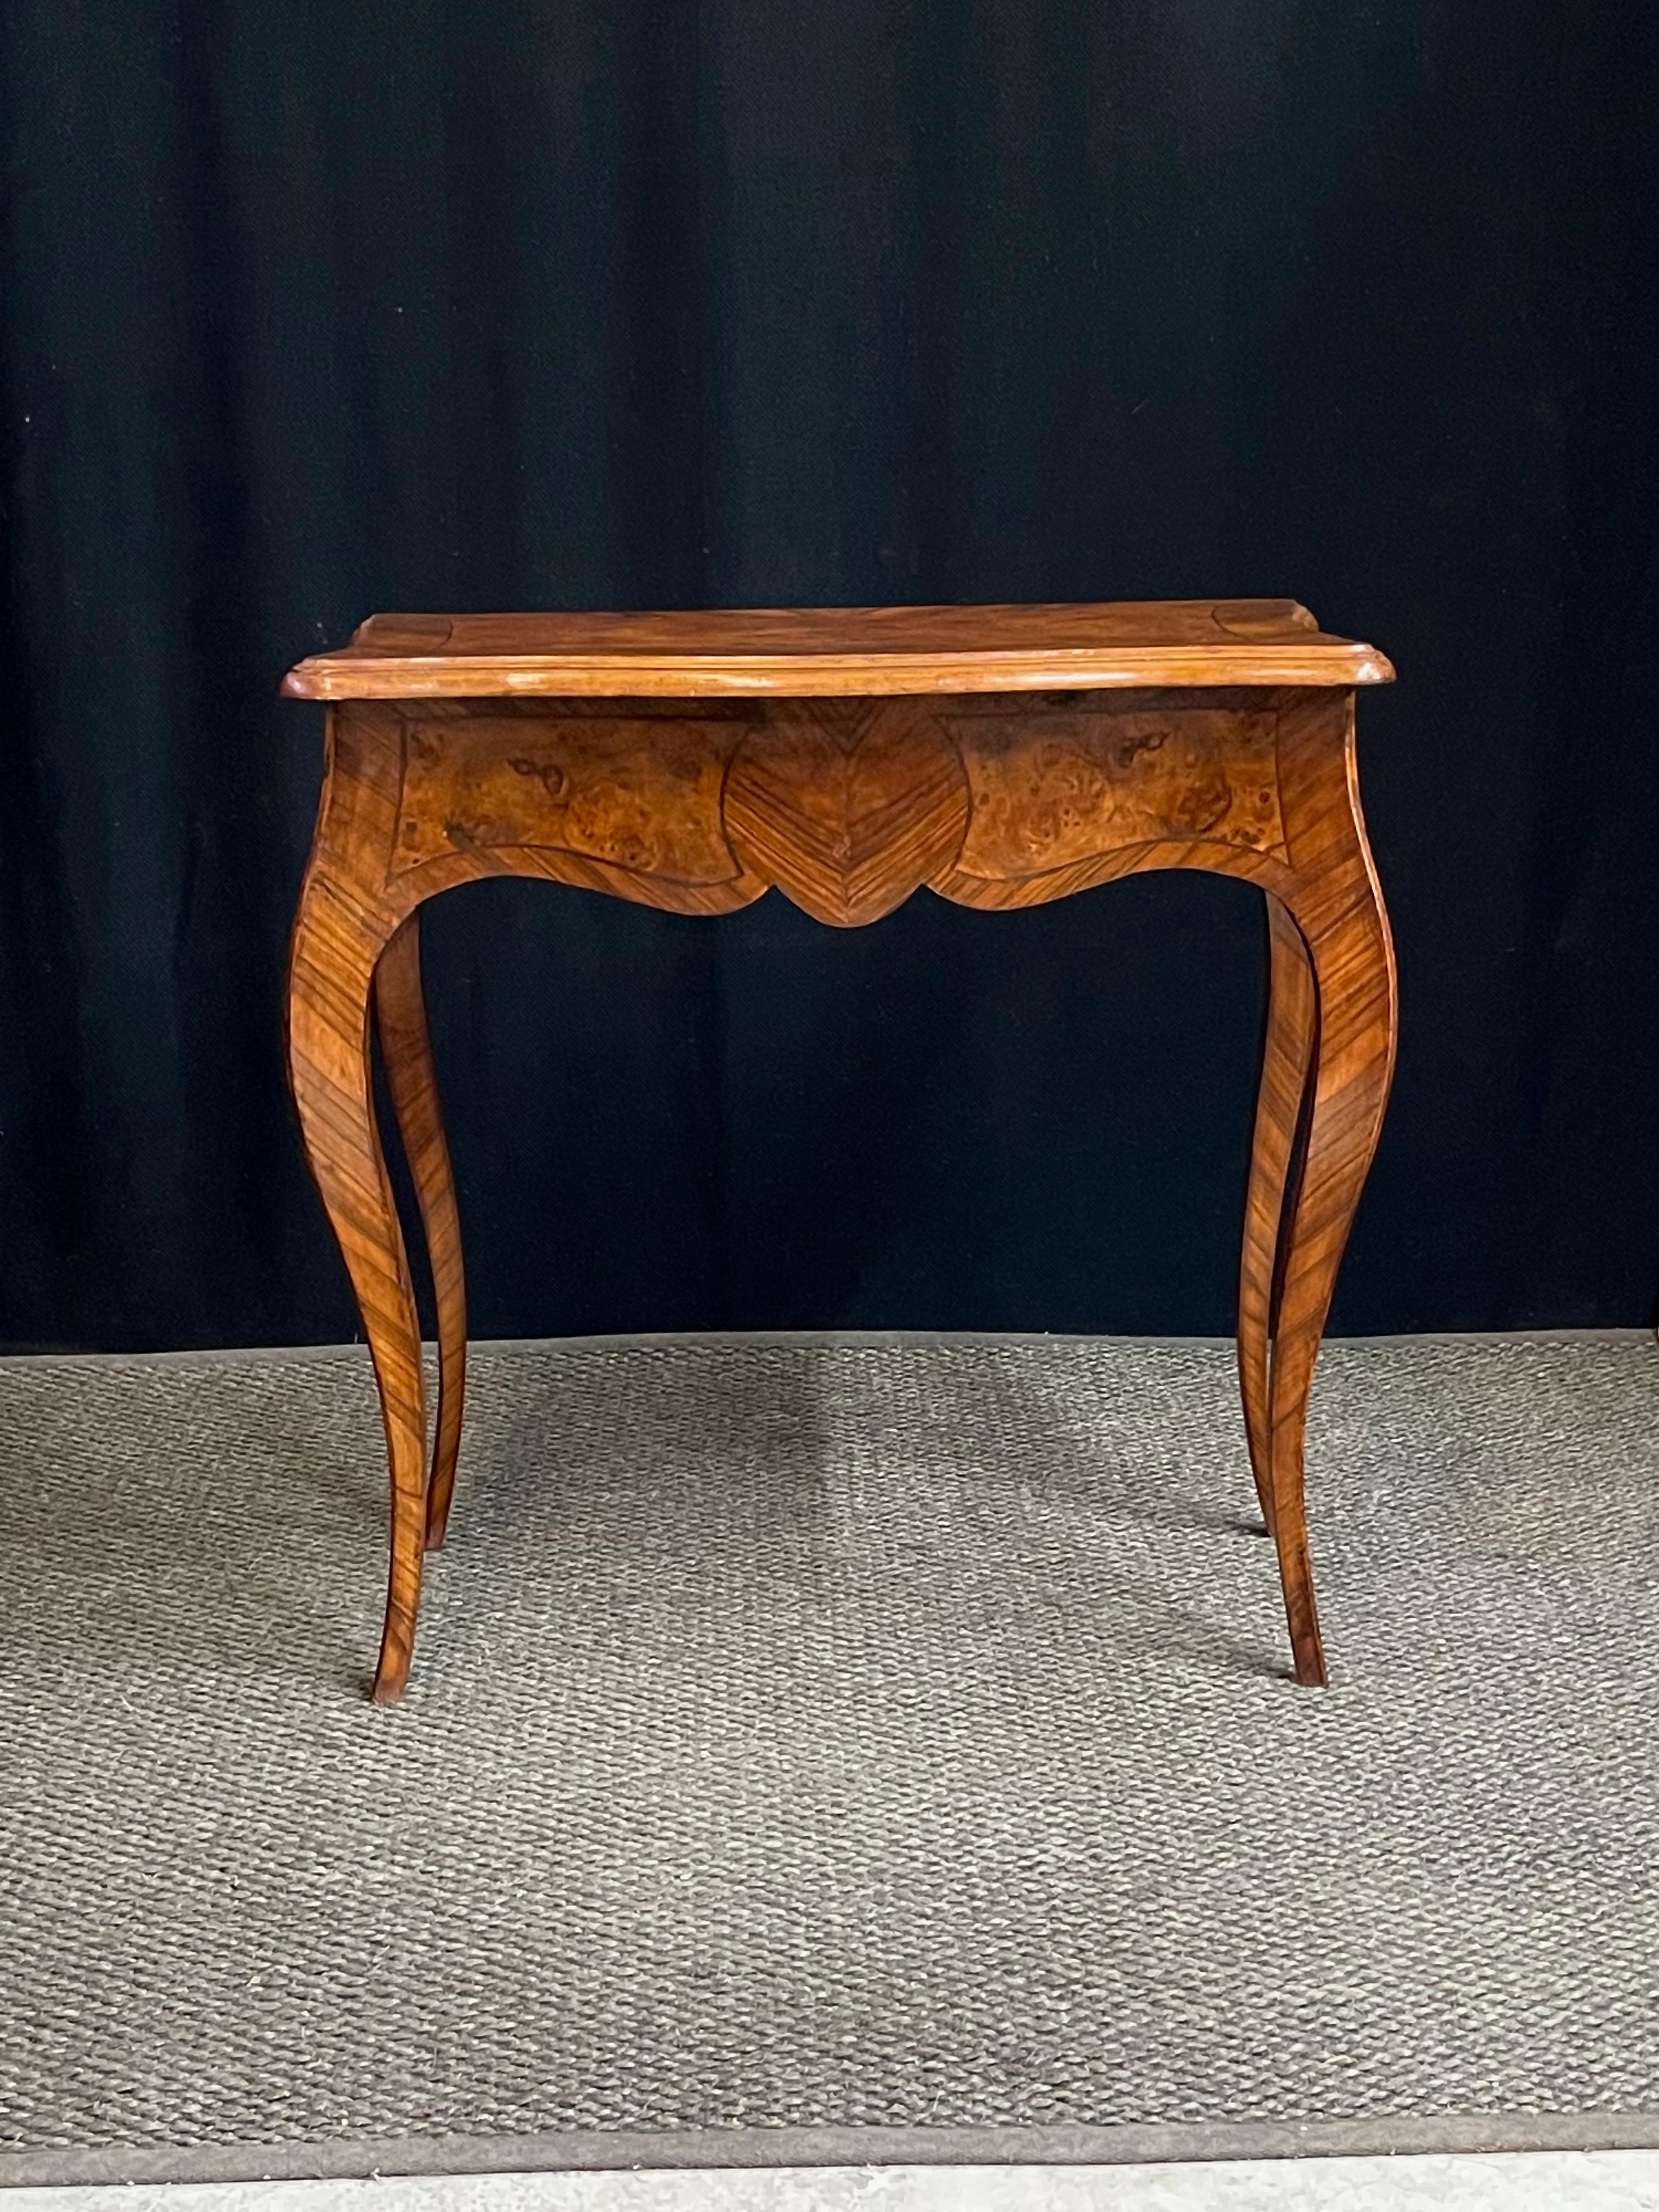 Elegant 20th Century Italian serpentine front console table with a beautifully scalloped apron and exaggerated cabriole legs. The table is veneered in burled walnut inset by ebonized string inlay and a contrast cross-banding. A very versatile piece